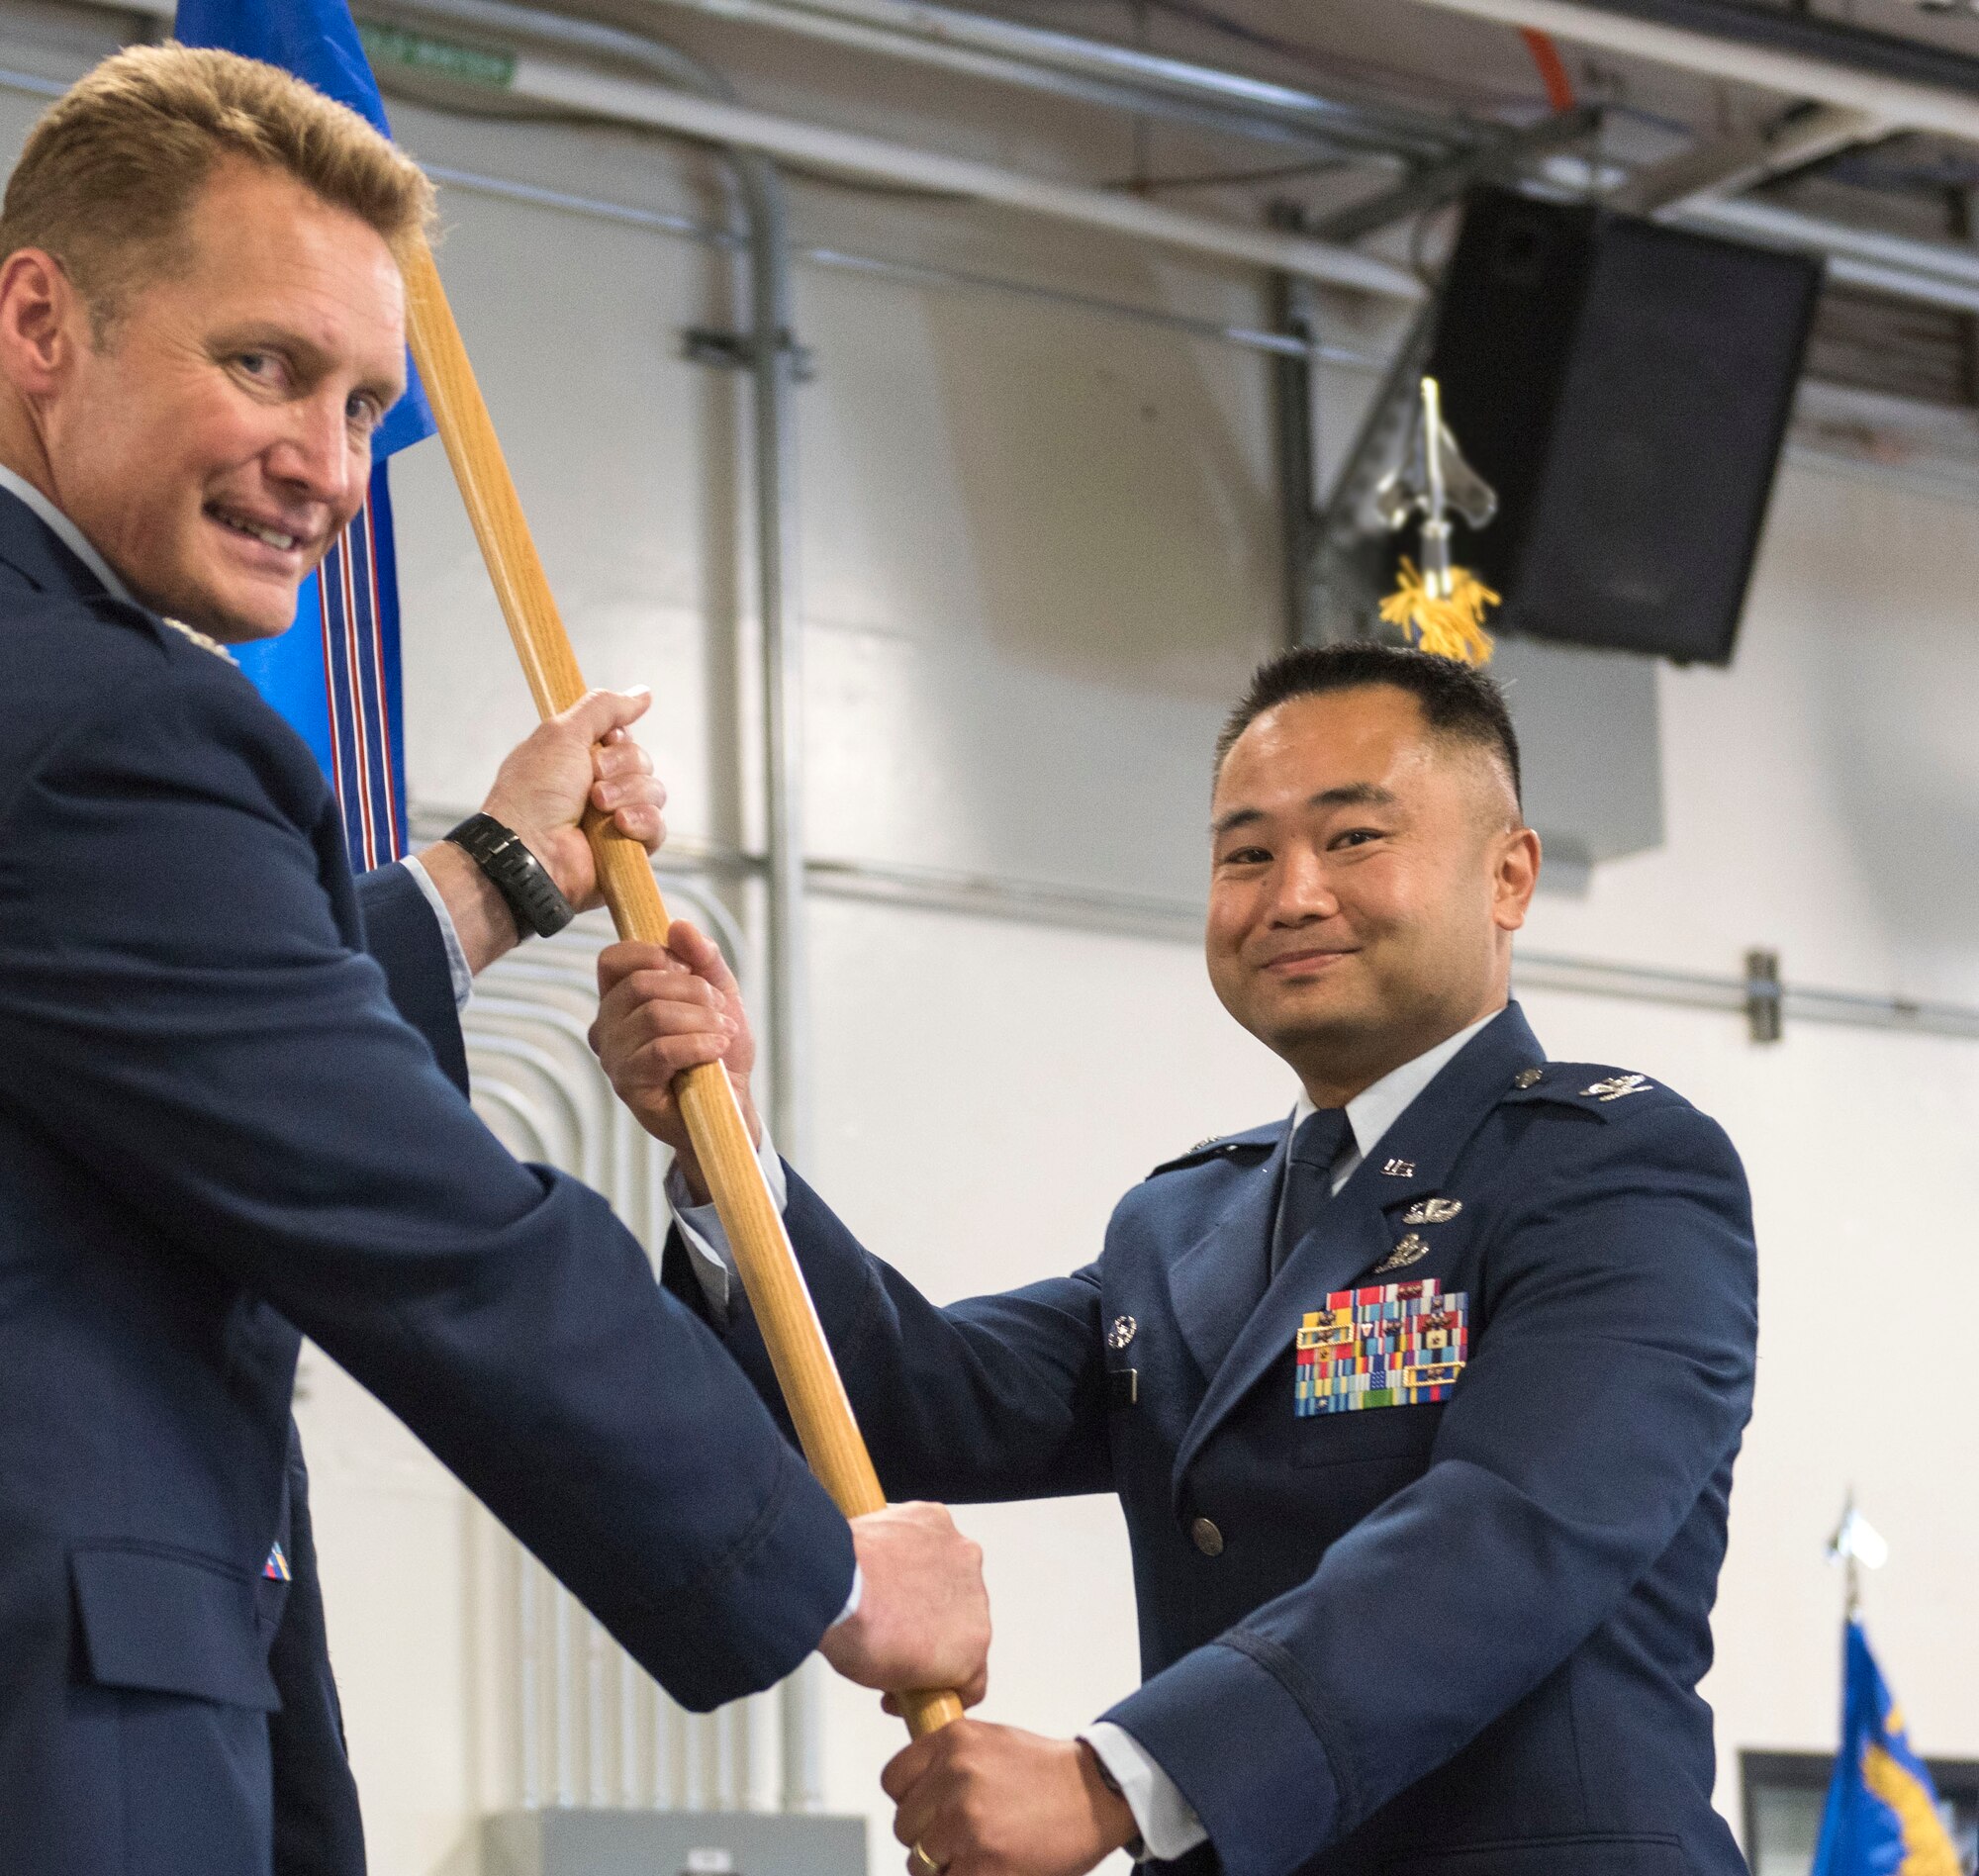 Col. Marvin T. Ee accepts the 176th Mission Support Group command flag from 176th Wing commander Col. Blake Gettys at a ceremony on Joint Base Elmendorf-Richardson. National Guard photo by Tech. Sgt. N. Alicia Halla.